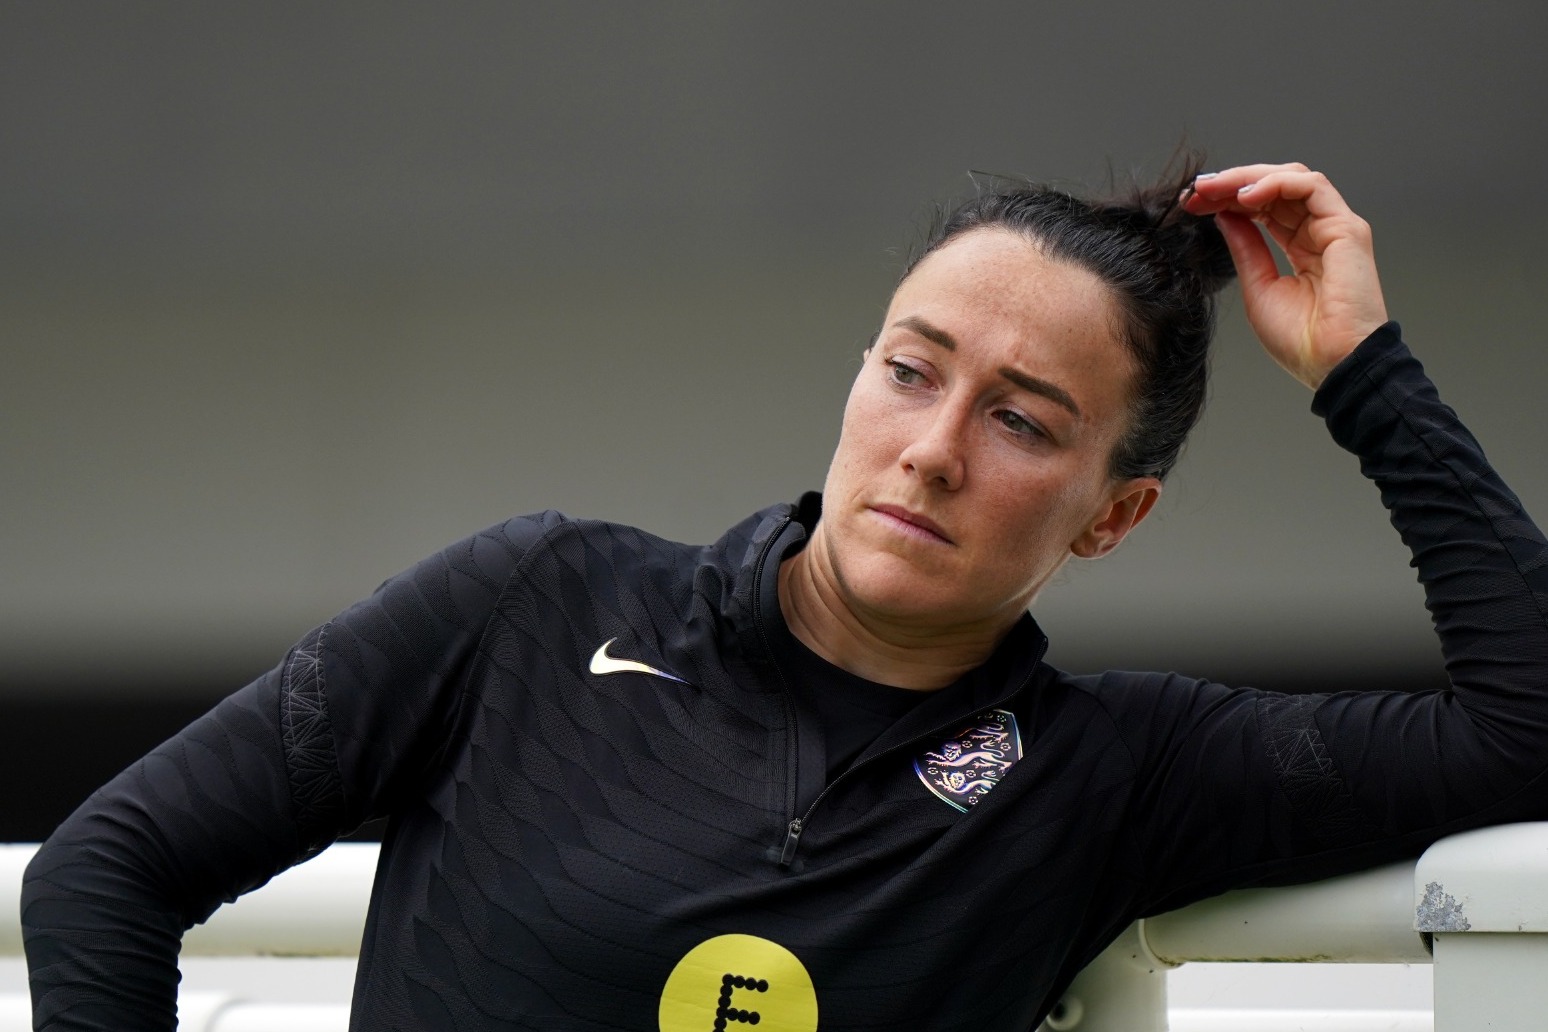 England Women hope to learn from Three Lions reaching Euros final  Lucy Bronze